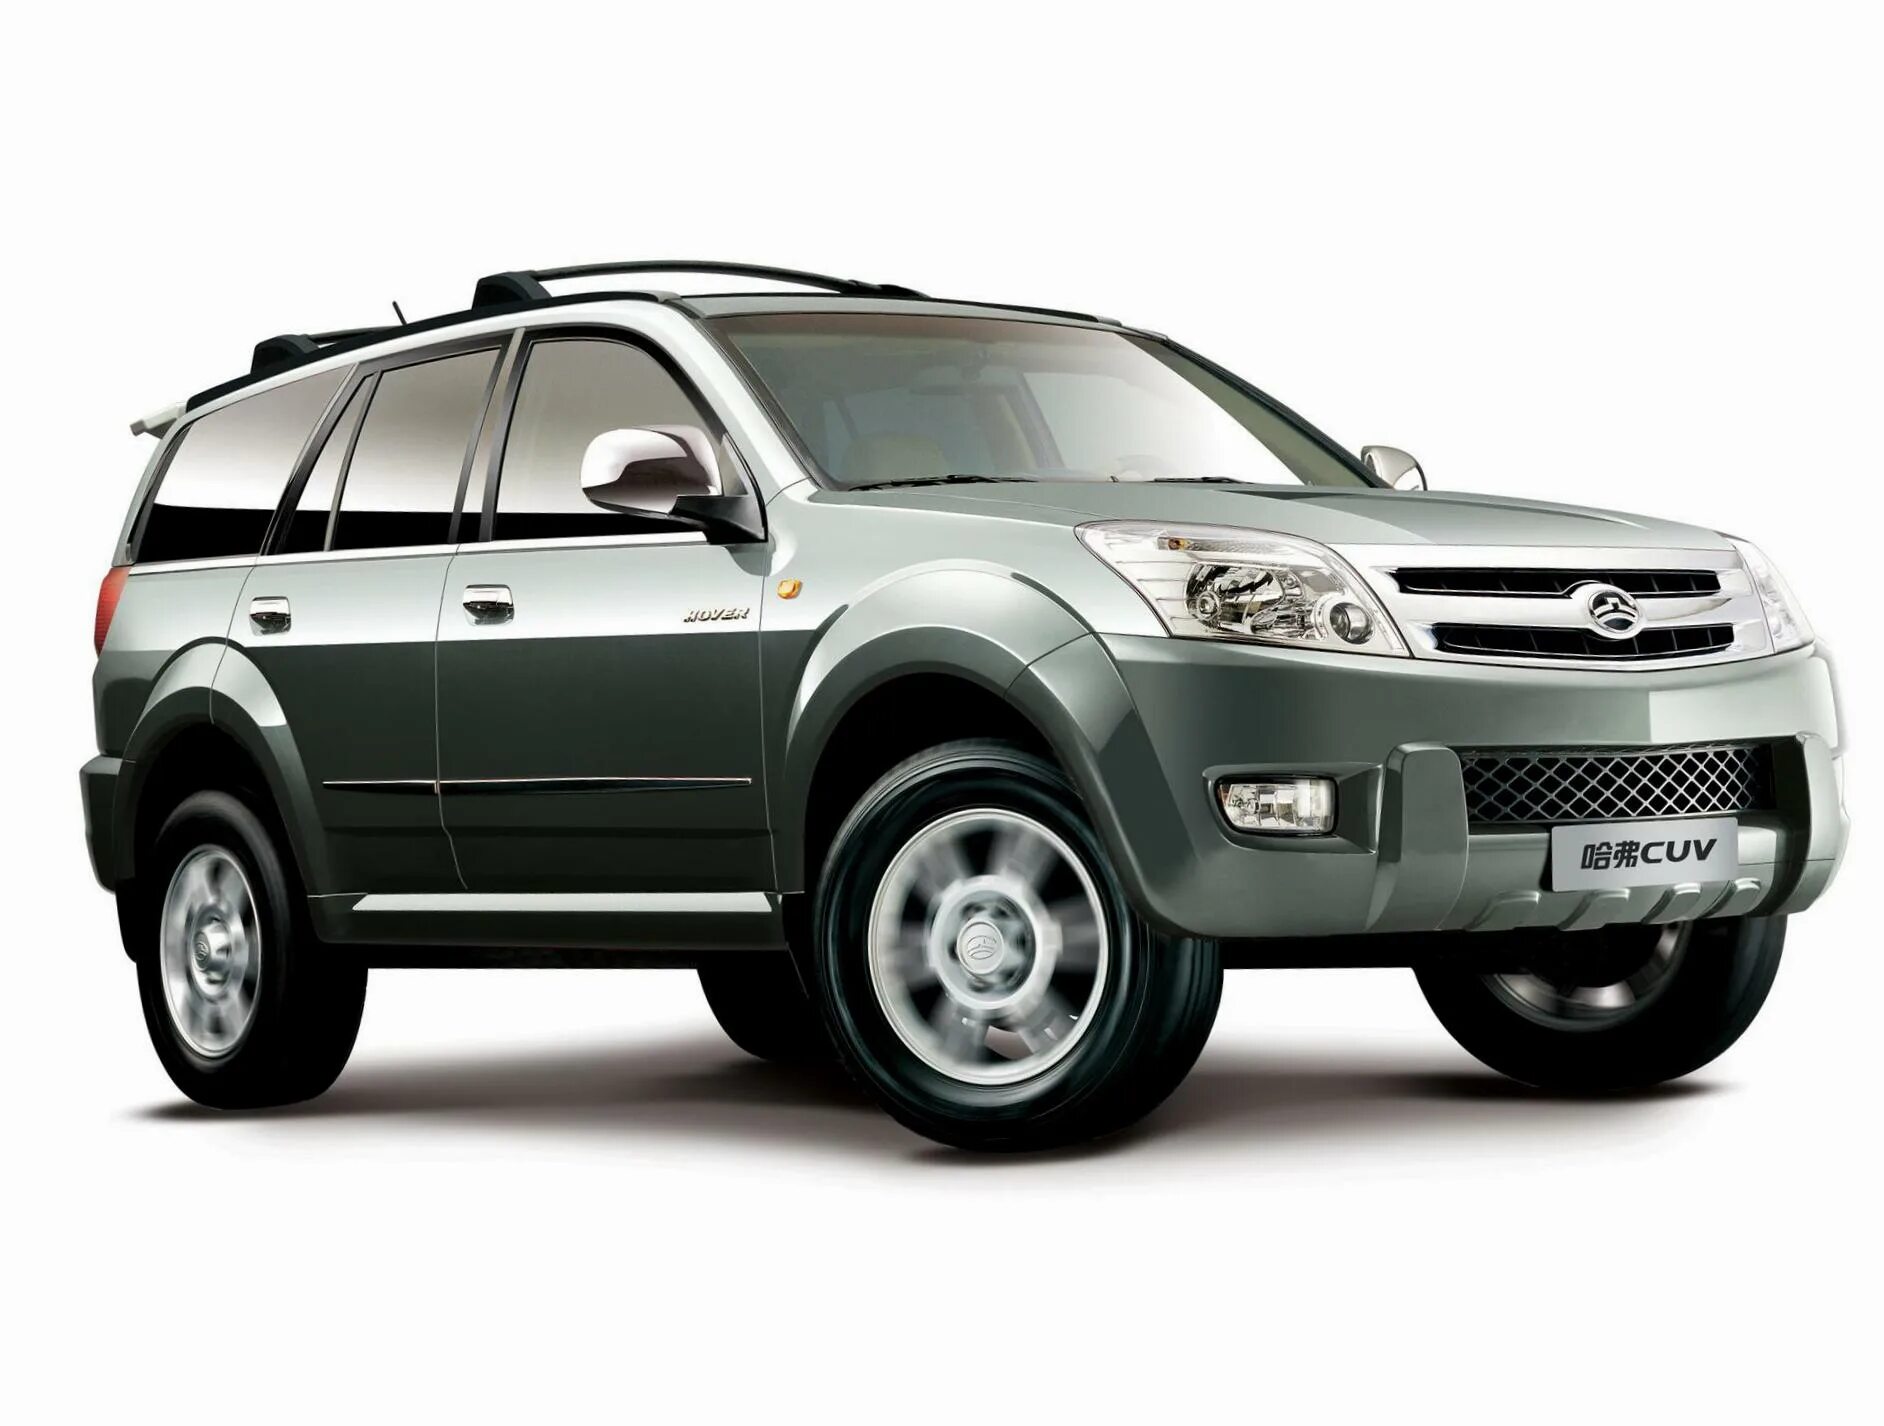 Ховер 1. Great Wall Hover 2007. Great Wall Hover 2005. Great Wall Hover 2014. Great Wall Hover 2010.